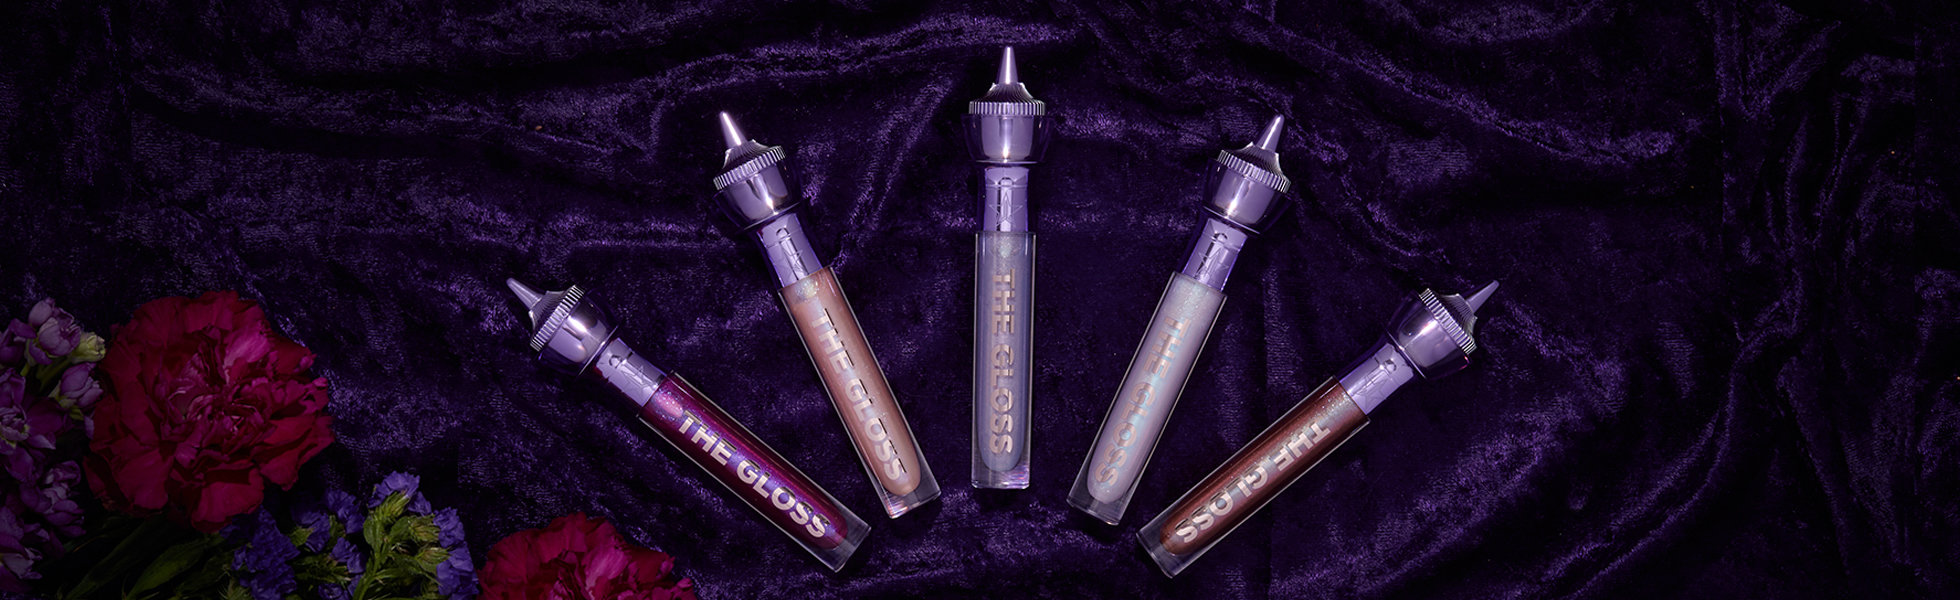 Jeffree Star Cosmetics The Gloss from the Blood Lust Collection